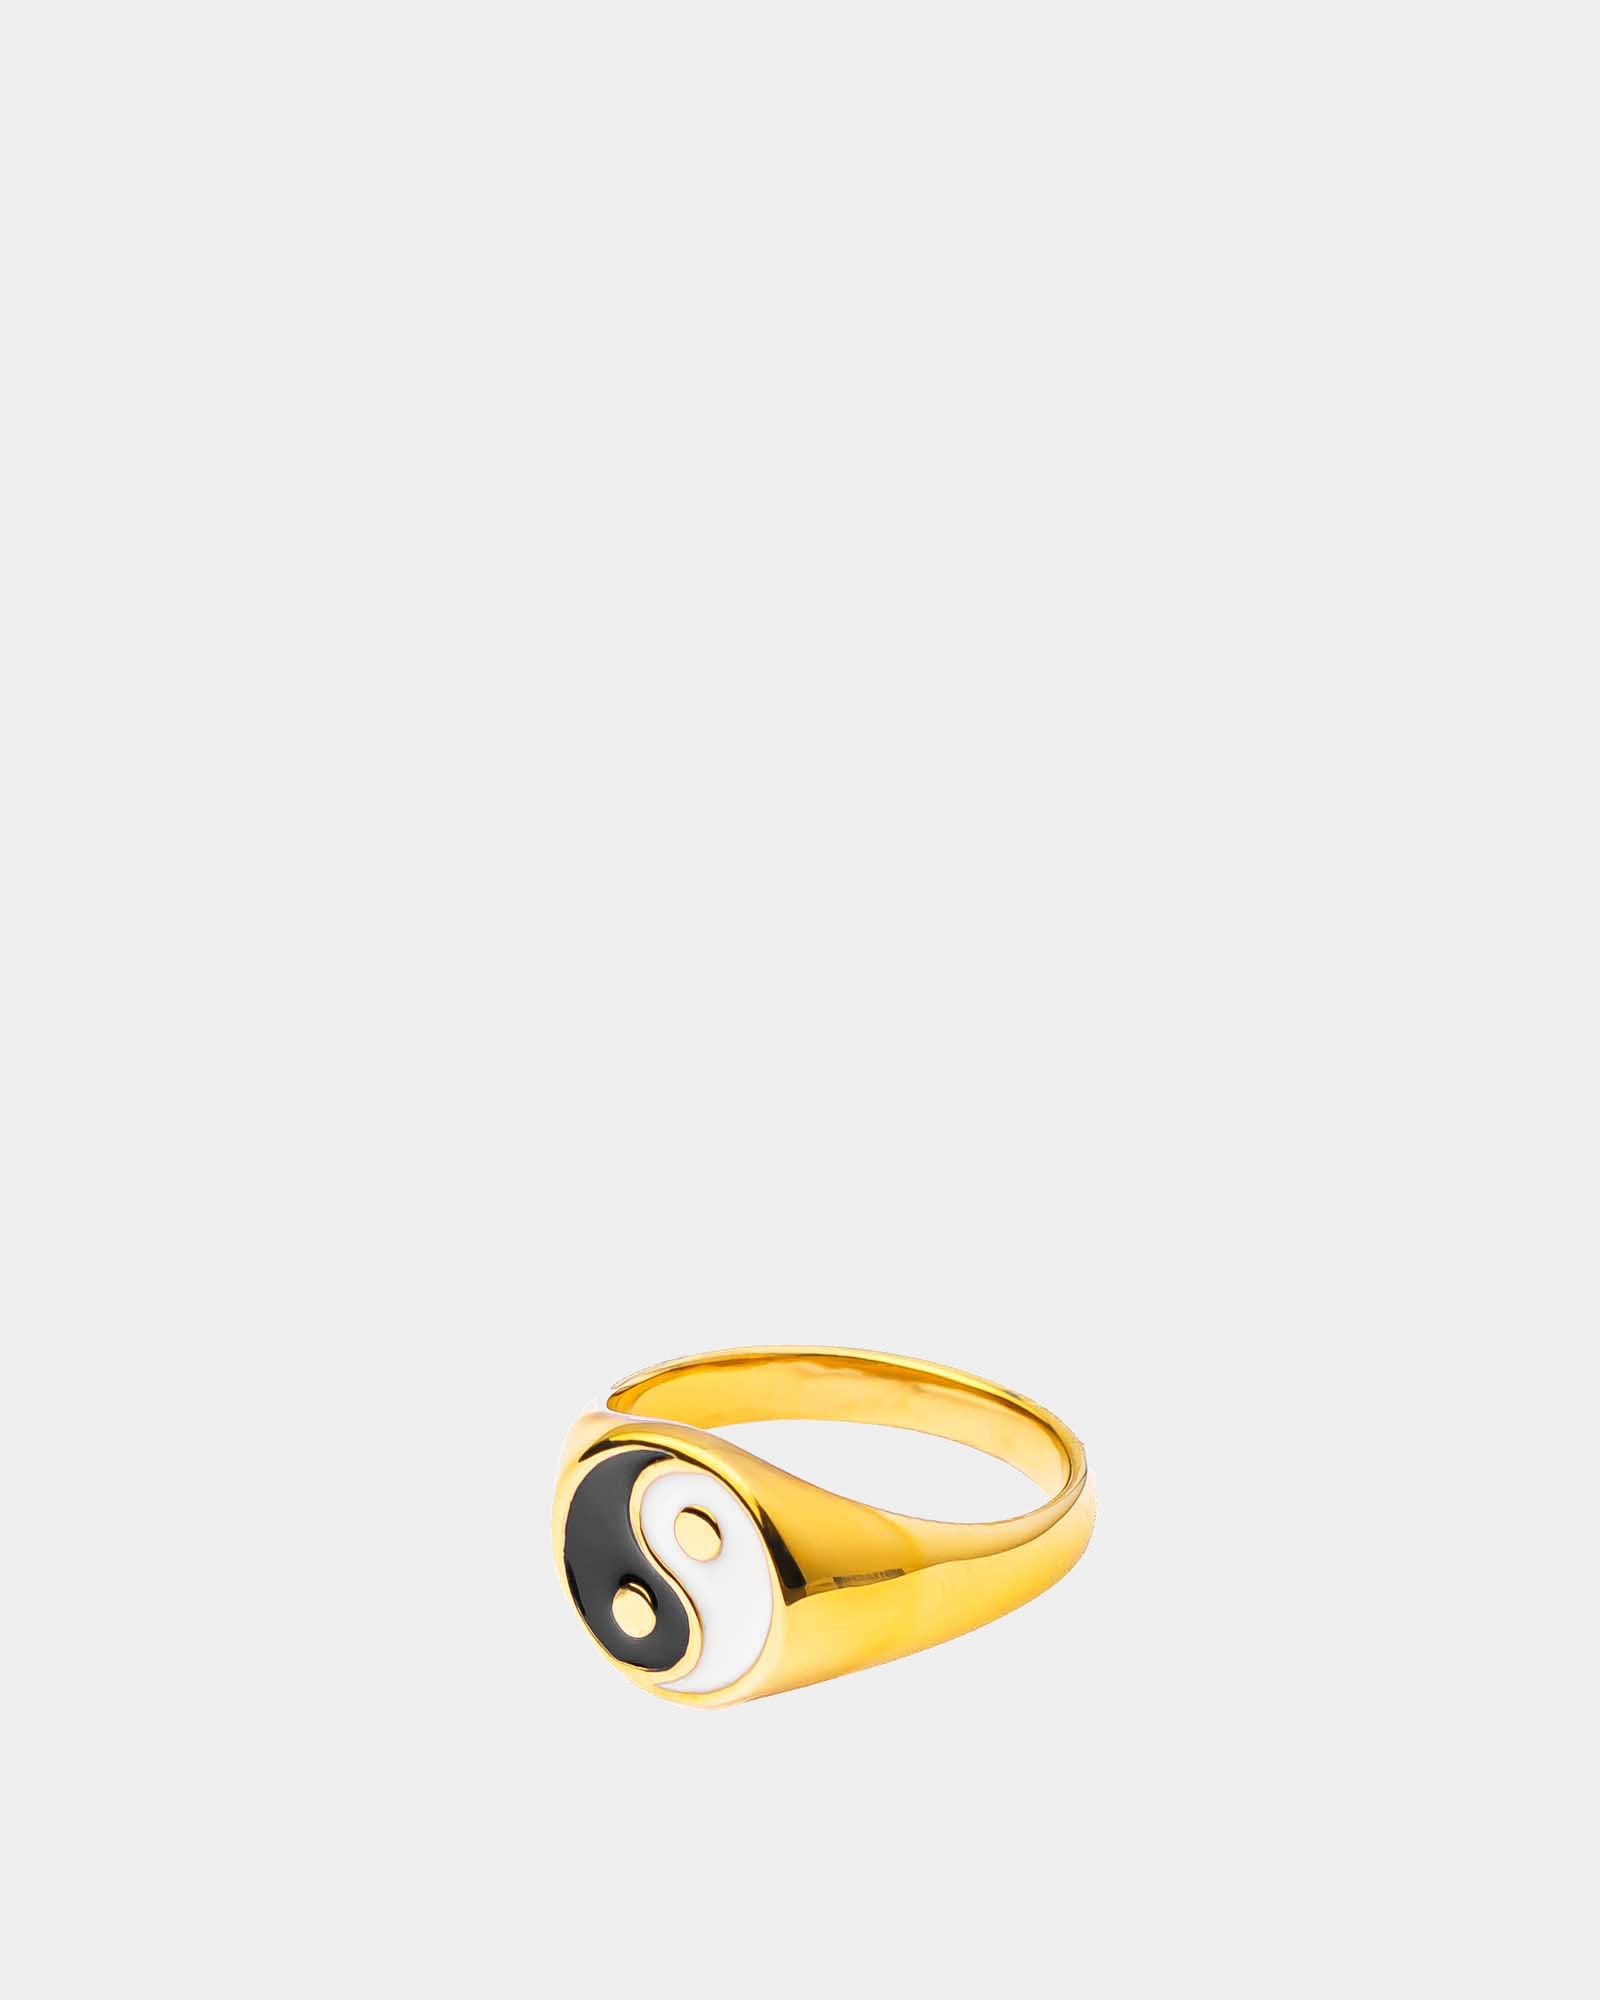 Yin Yang Ring - Golden Stainless Steel Ring - Online Unissex Jewelry - Dicci